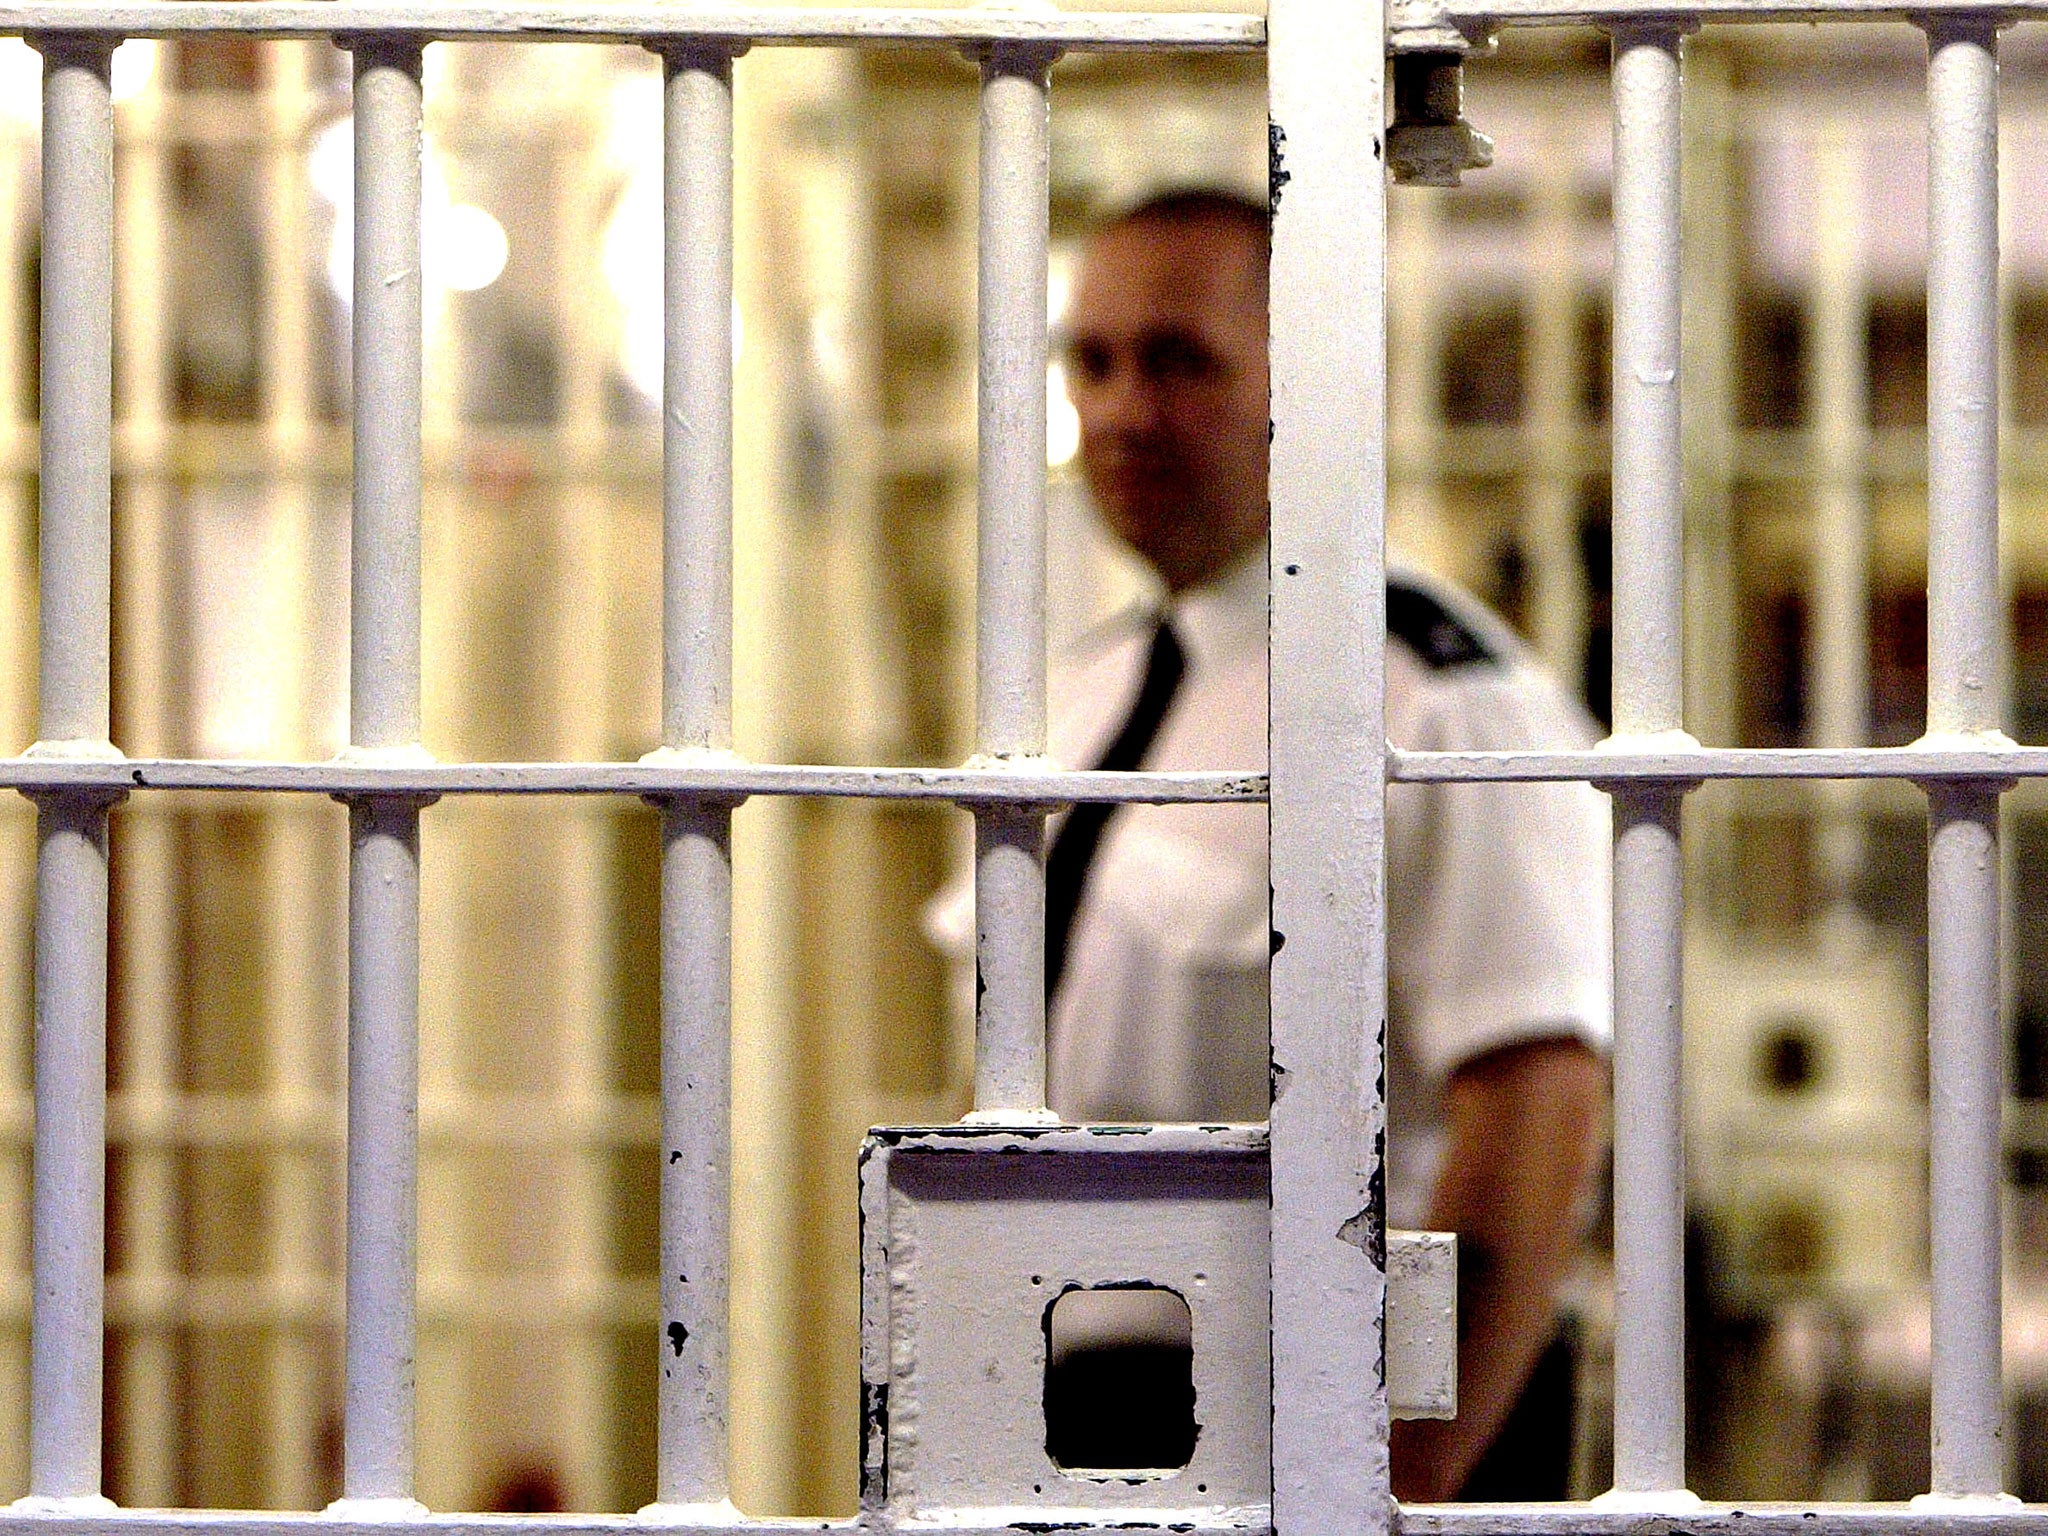 Suicides in UK prisons soar by 66 per cent in a single year